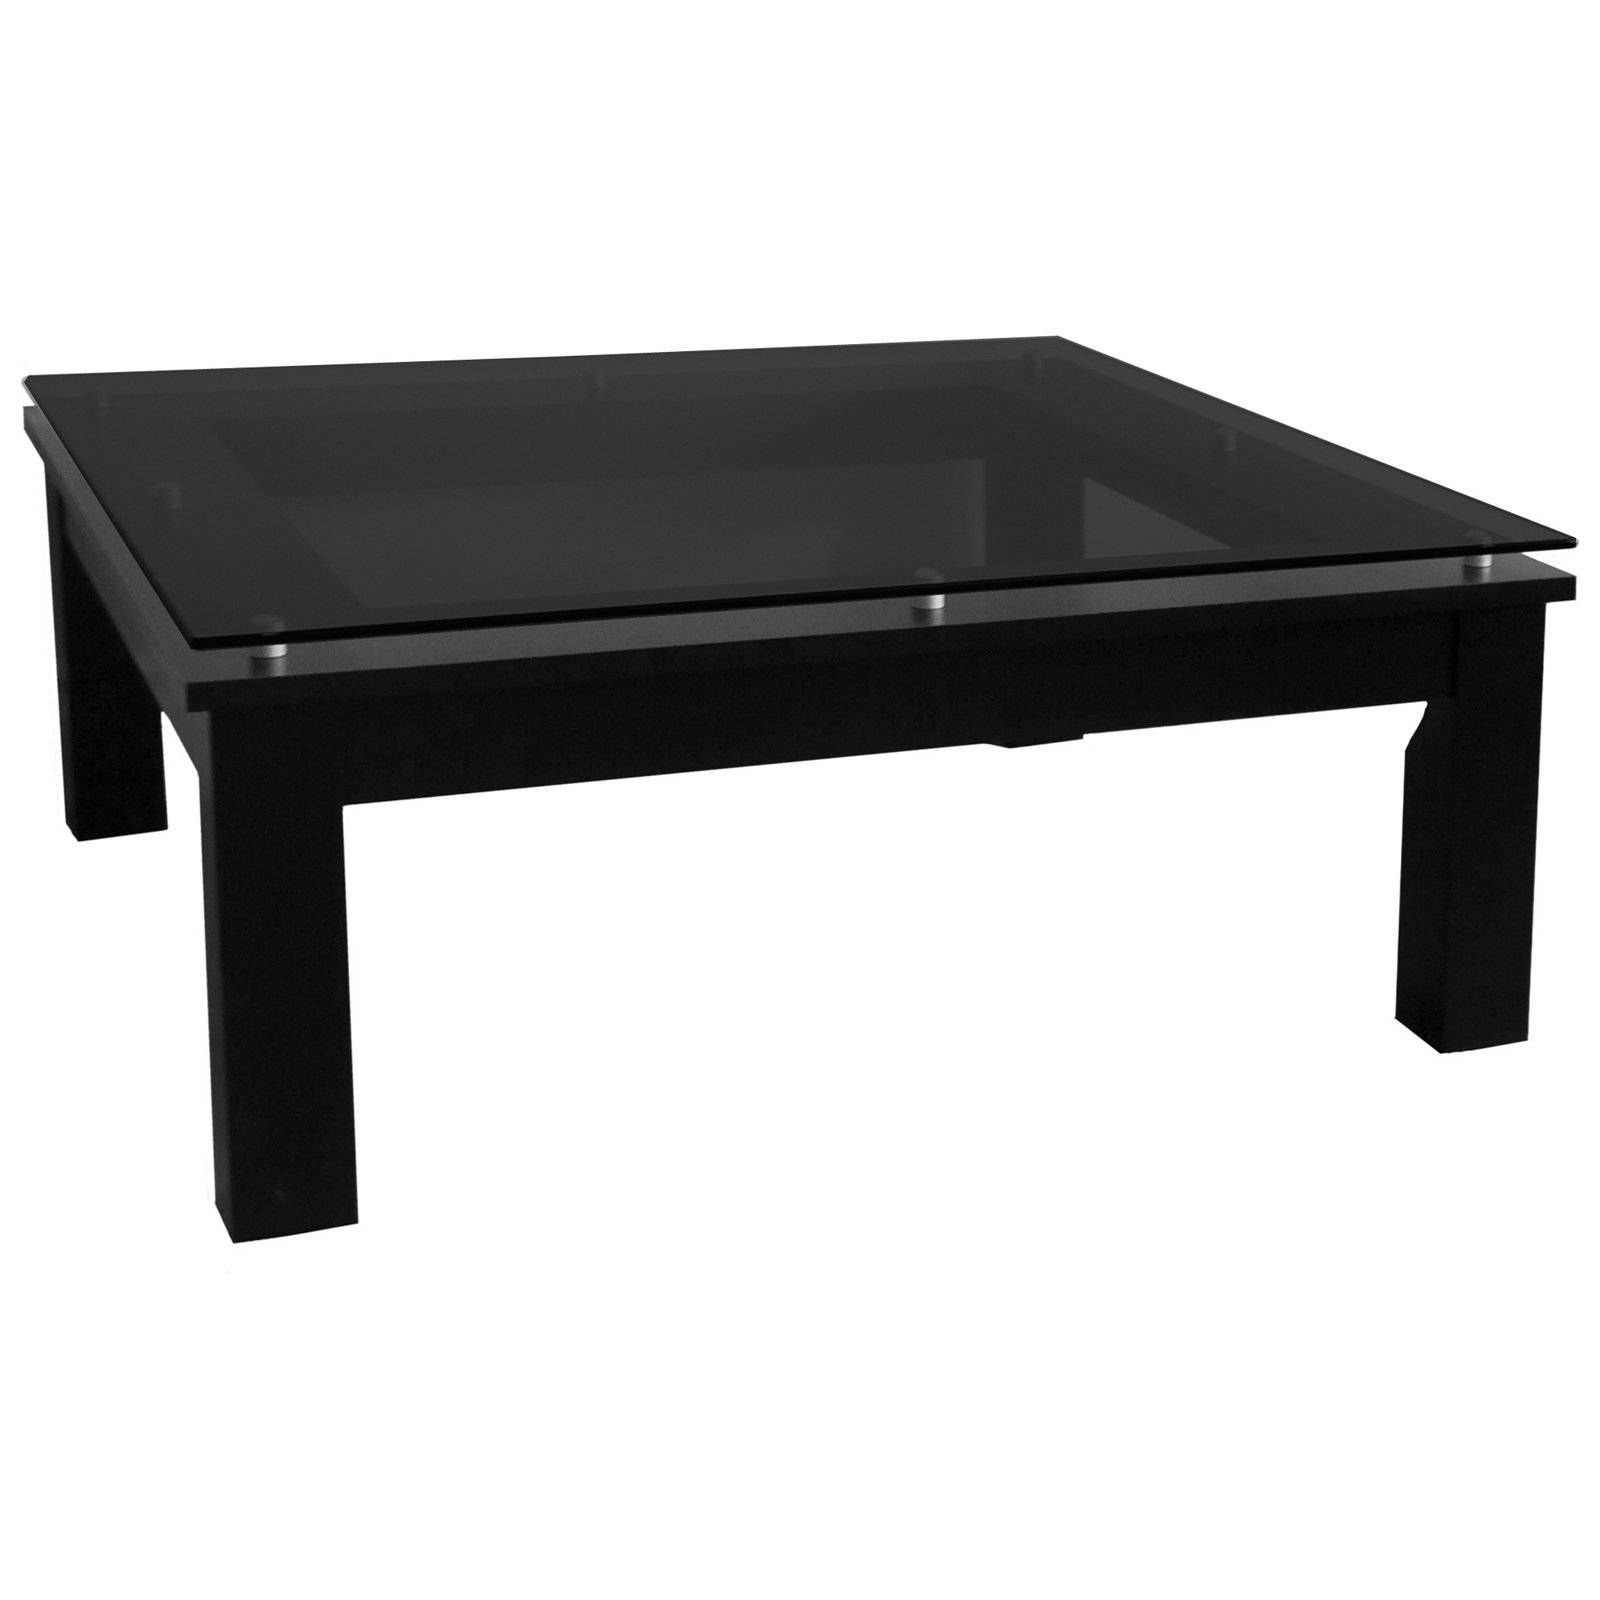 Simple Square Coffee Tables Black Table And Design Ideas Intended For Black Coffee Tables (View 2 of 30)